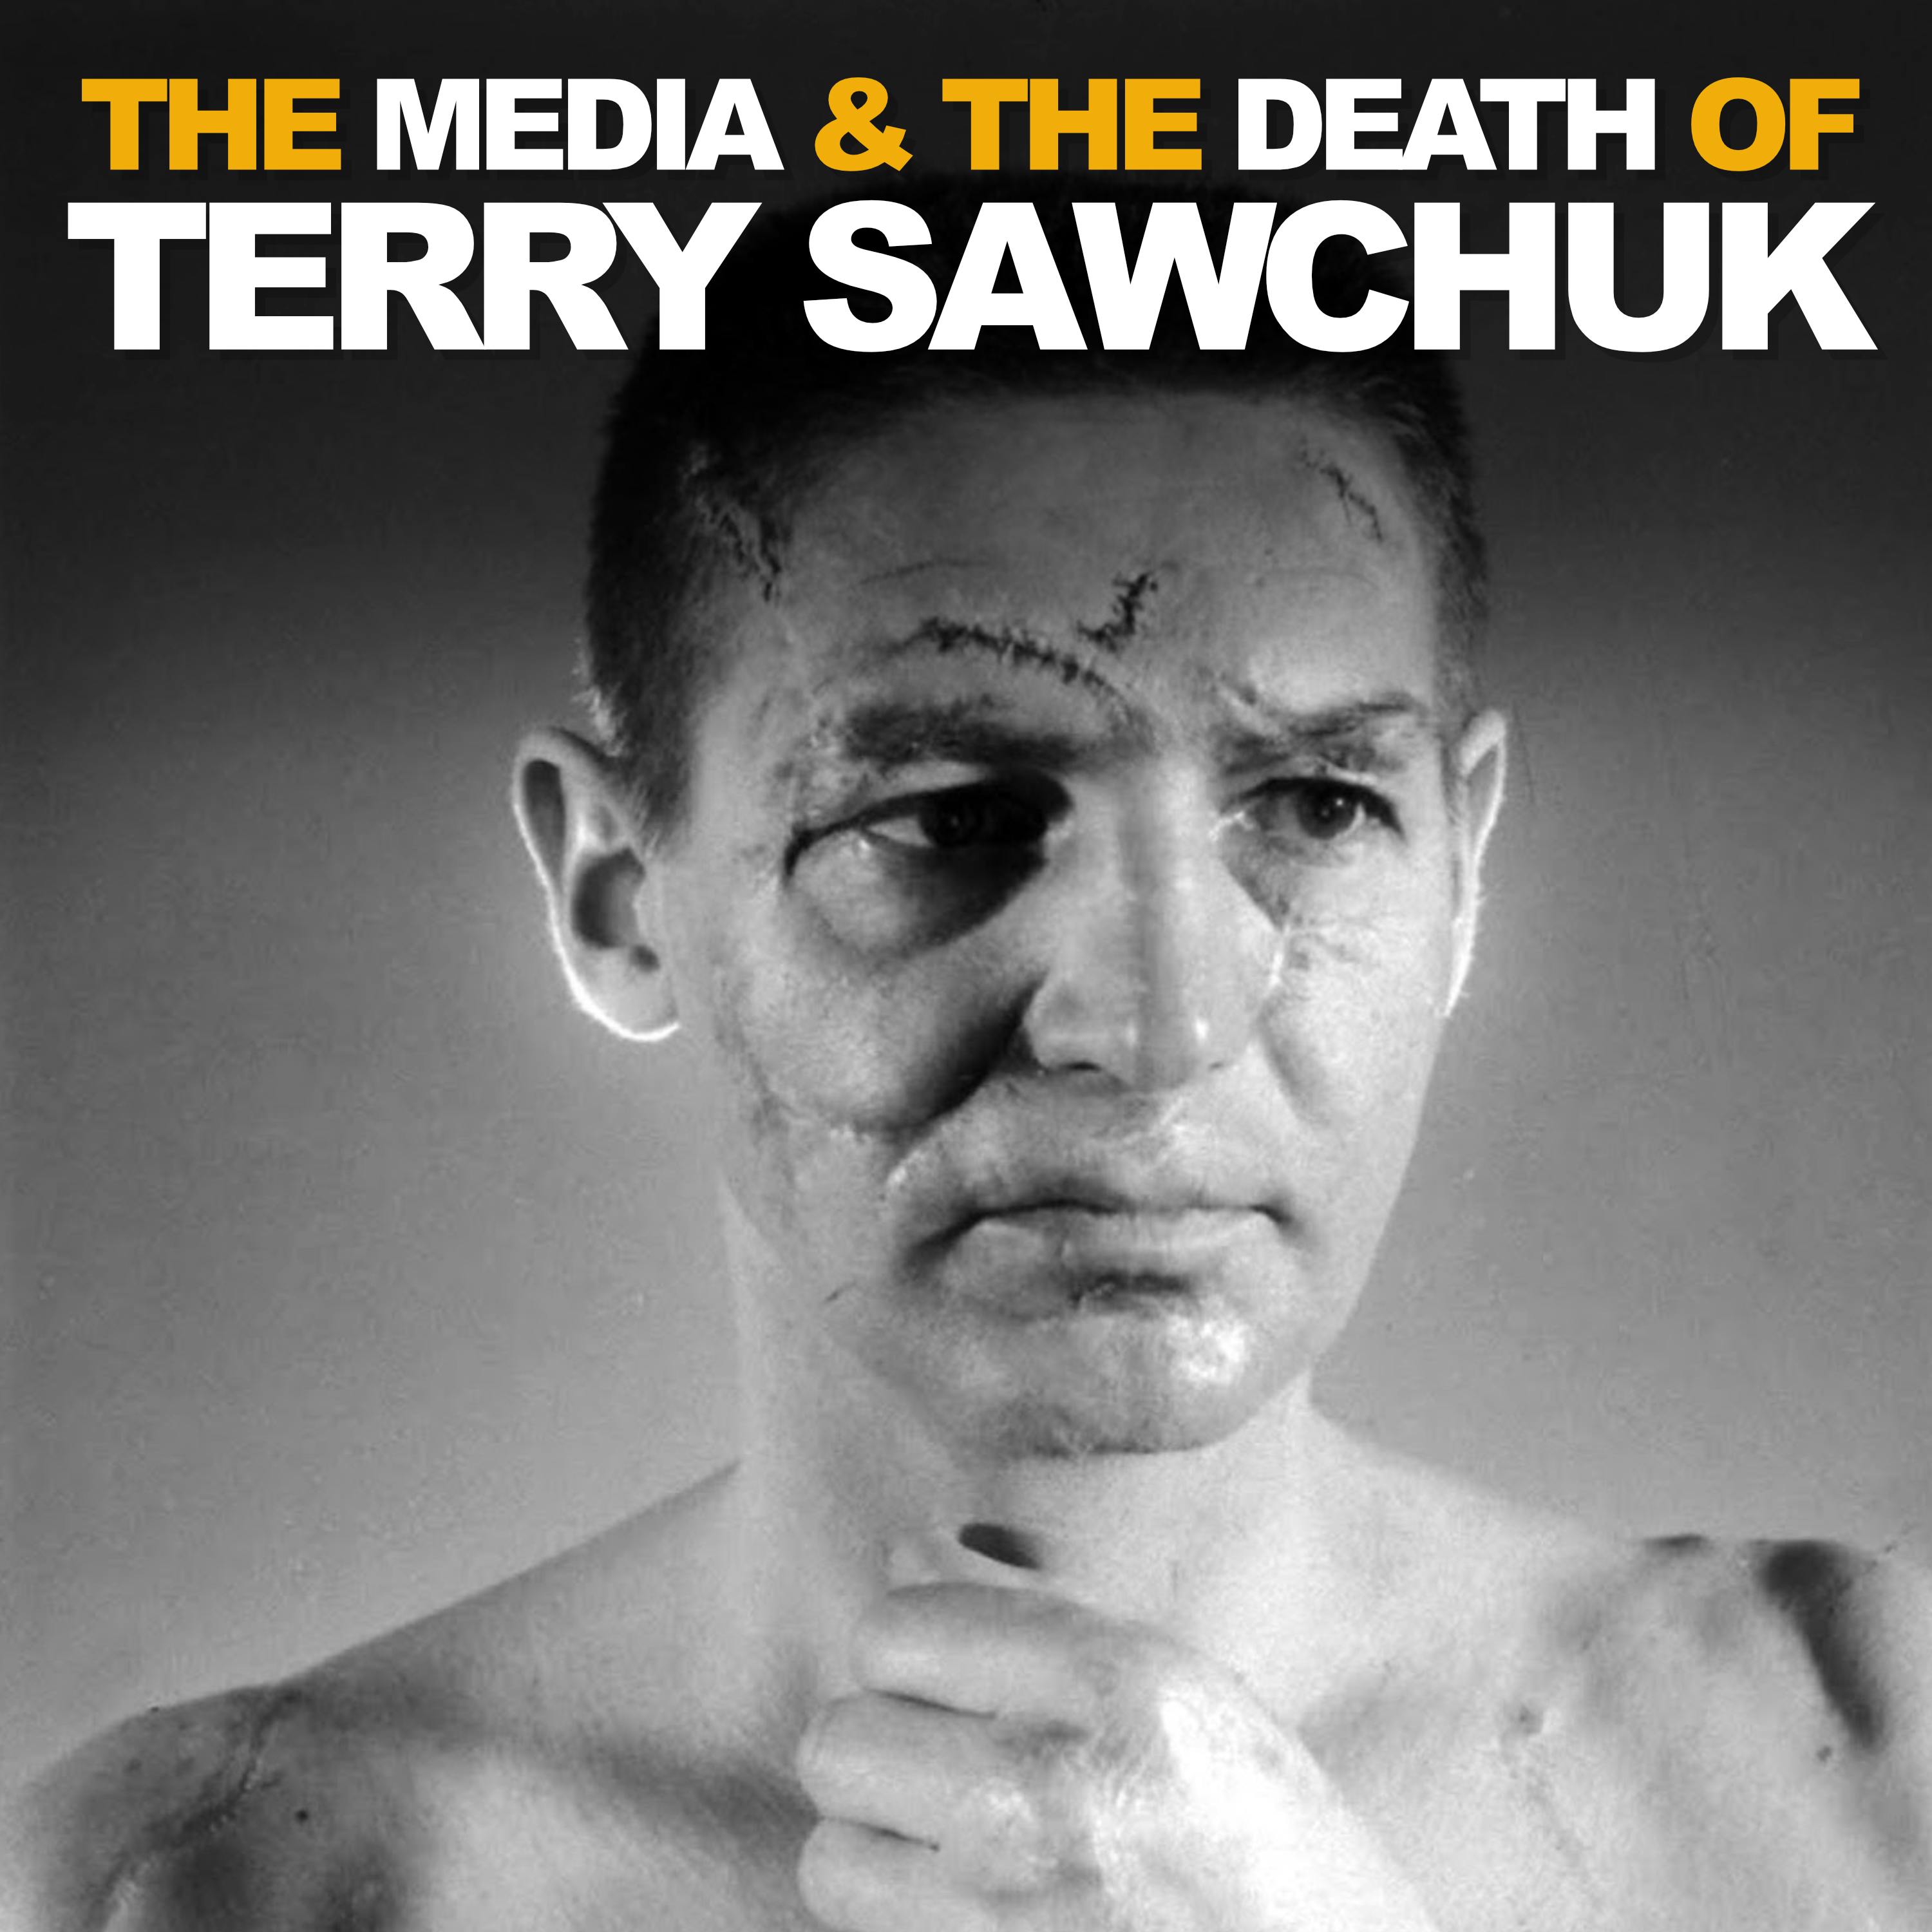 Part 1: The Media and the Death of Terry Sawchuk